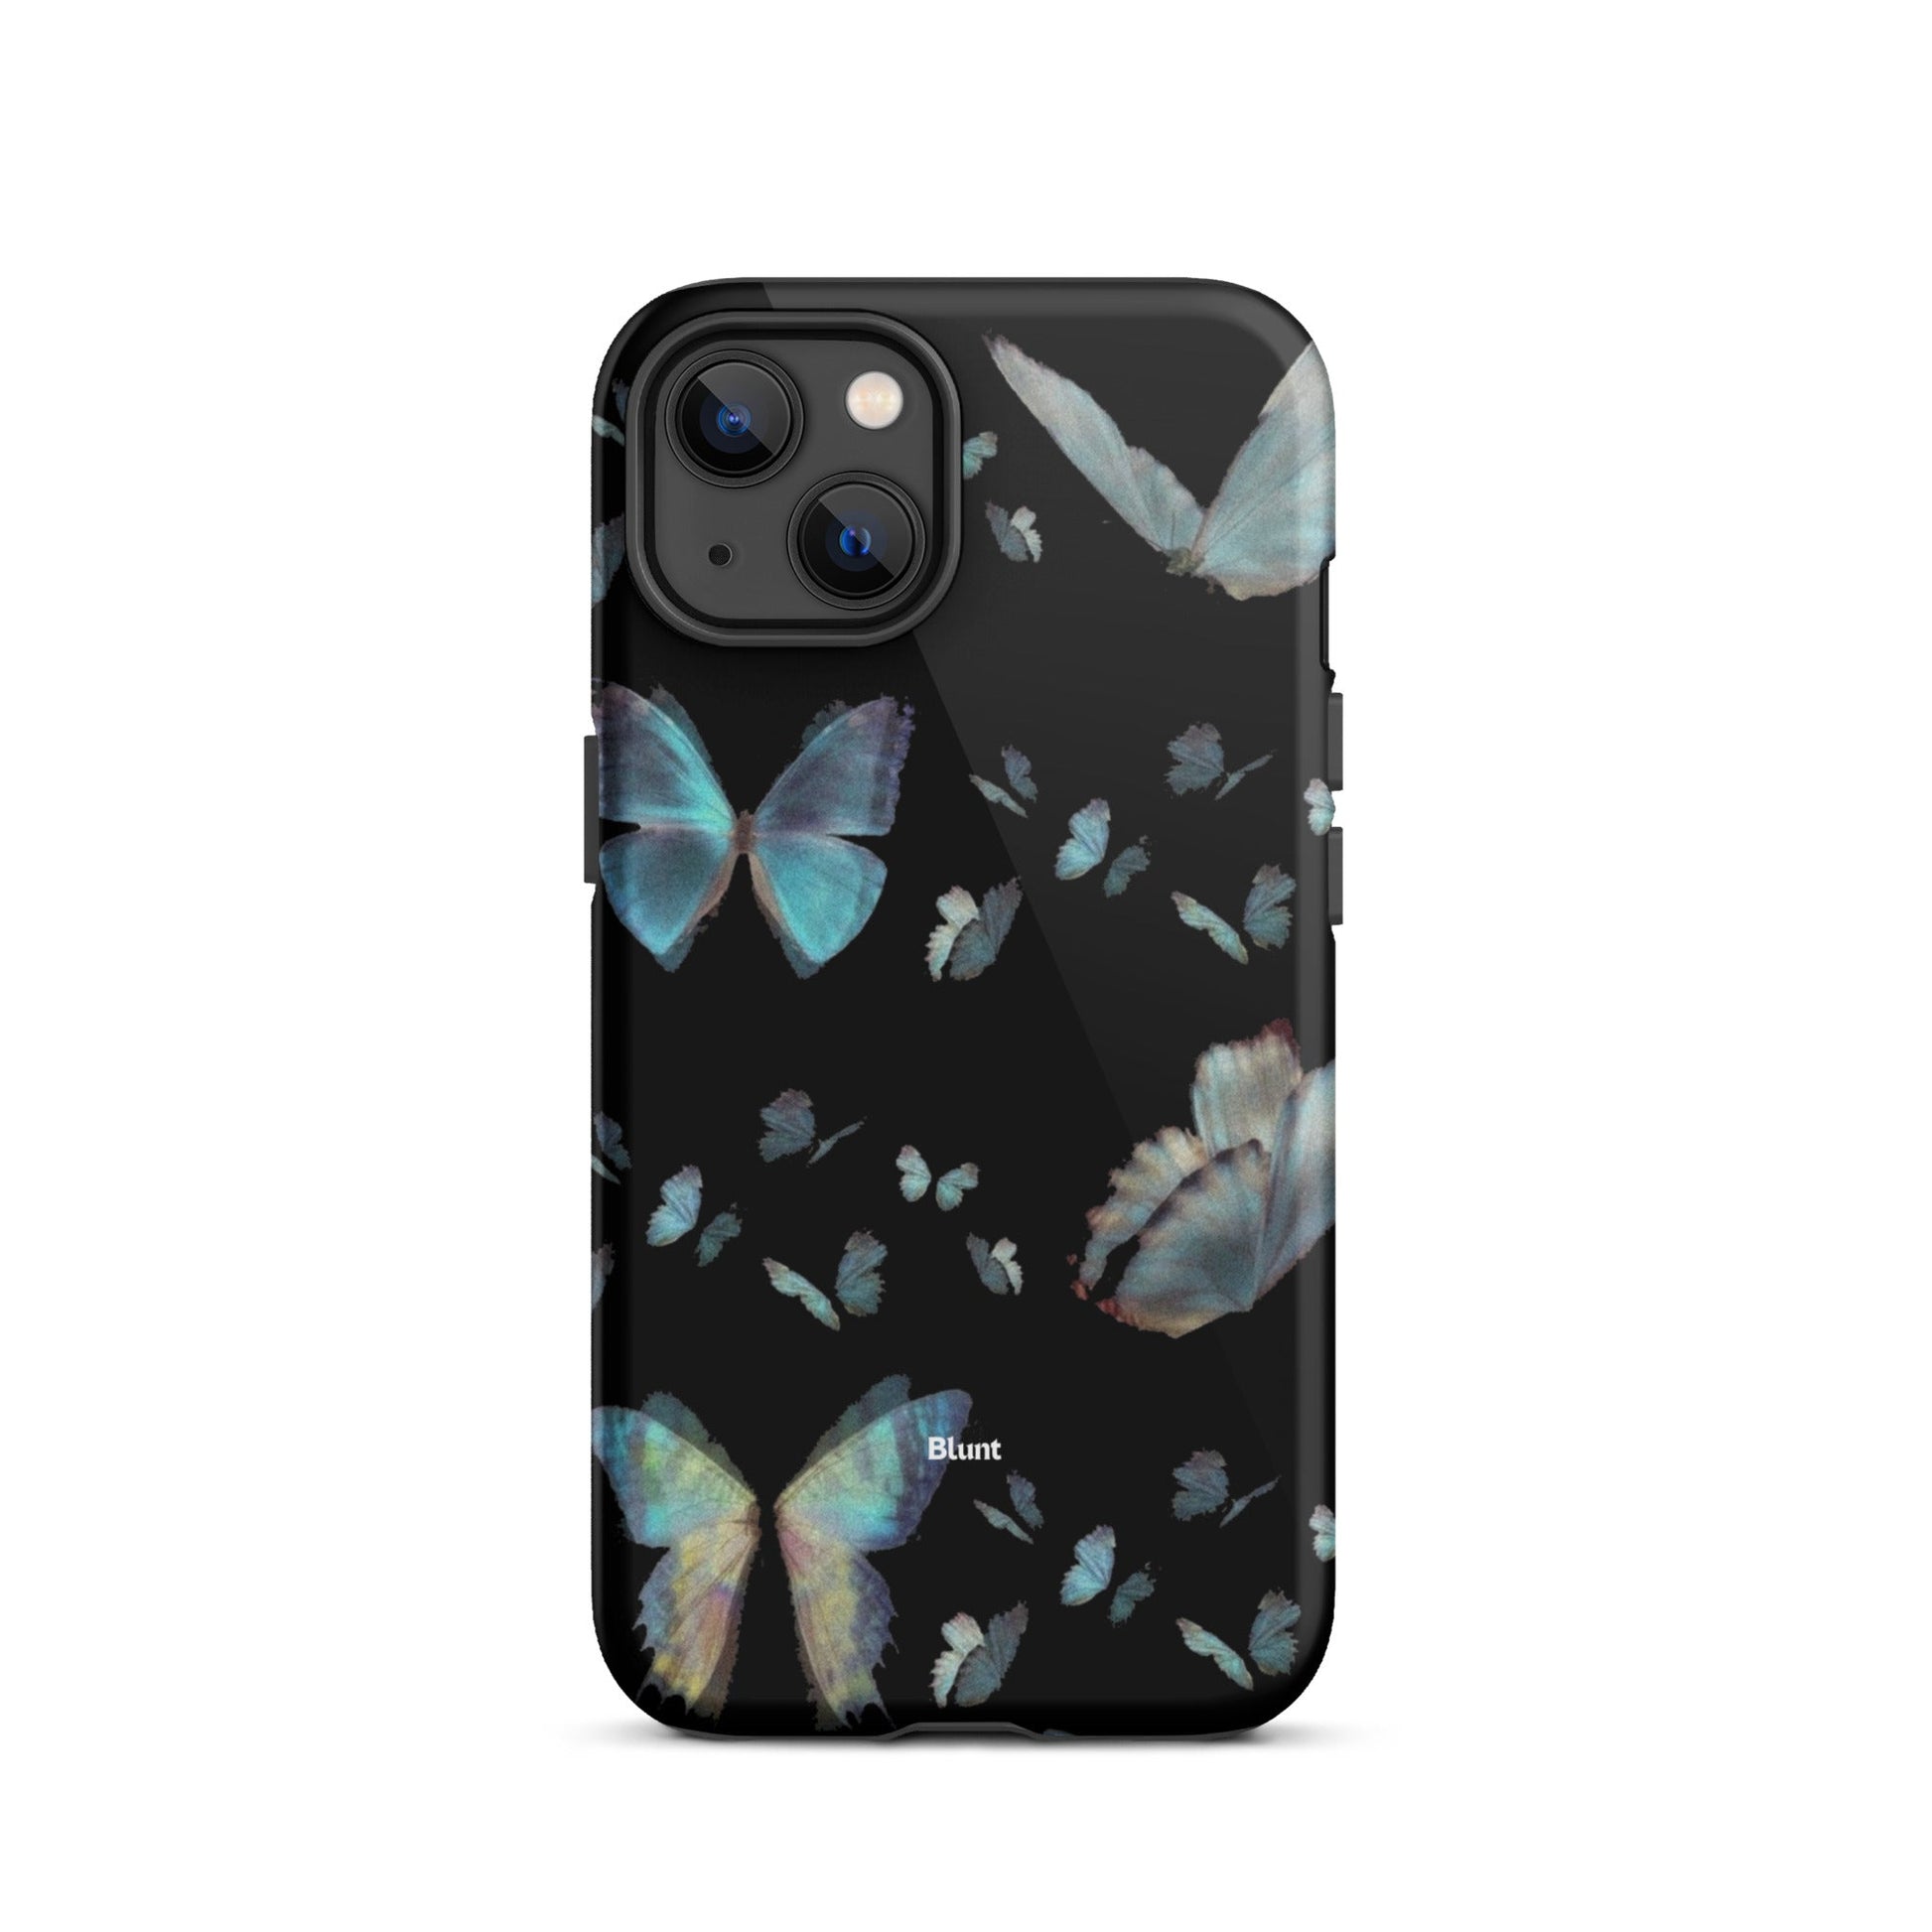 Fly High iPhone case - blunt cases